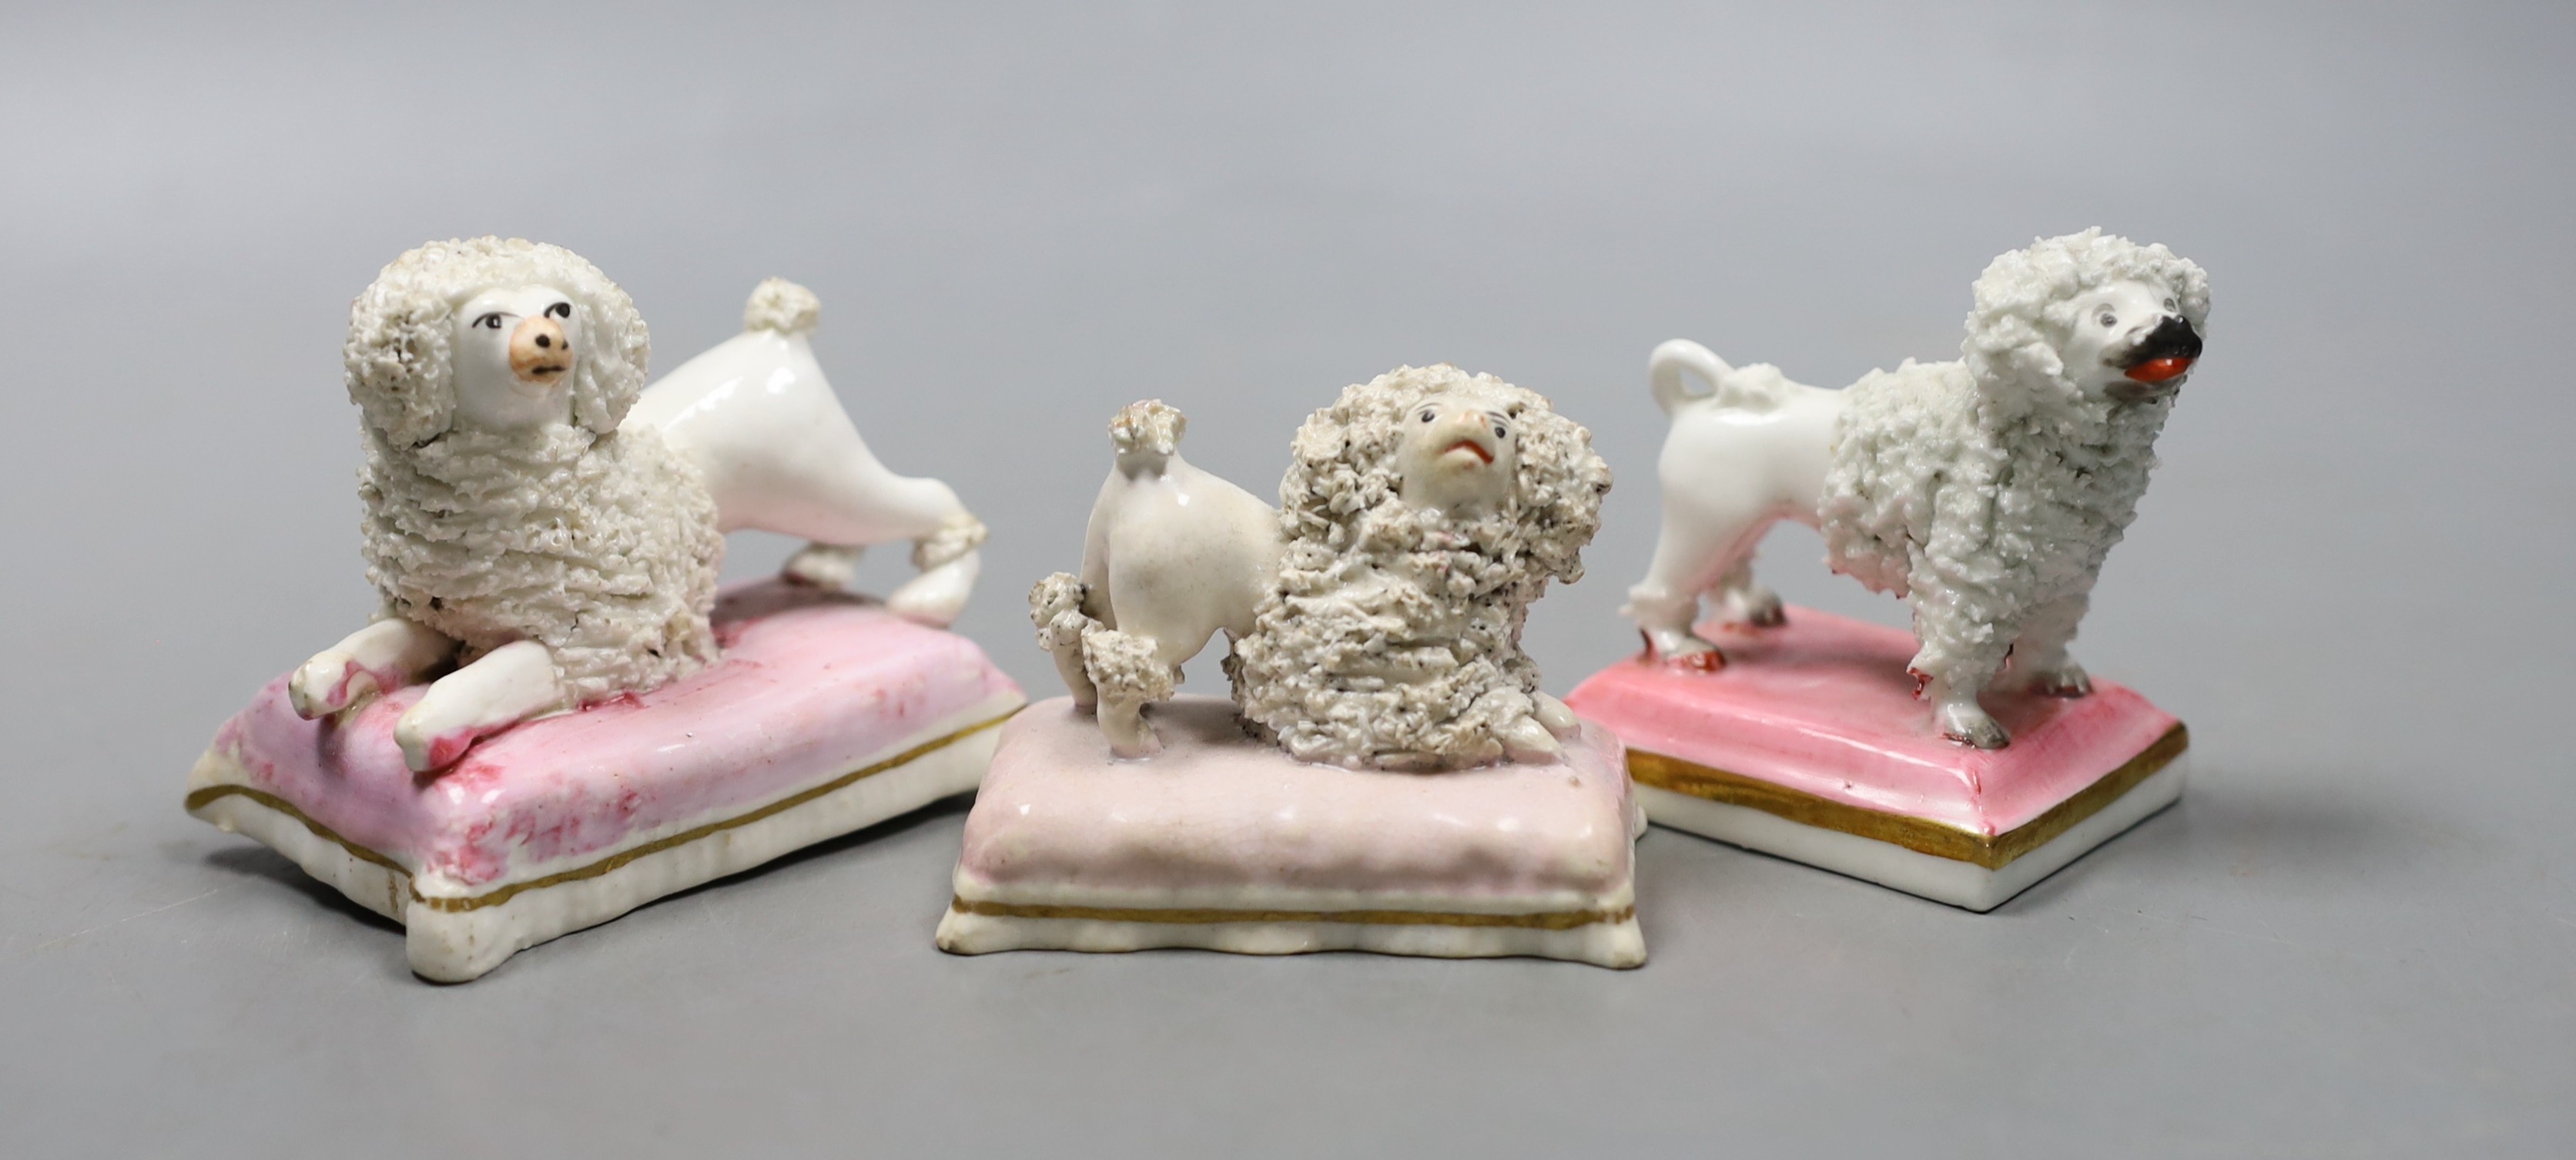 Three Staffordshire porcelain models of poodles, c.1835–50, each on a pink cushion base, largest 7.5 cm long, Cf. Dennis G Rice, Dogs in English porcelain, colour plate 82, Provenance- Dennis G Rice collection